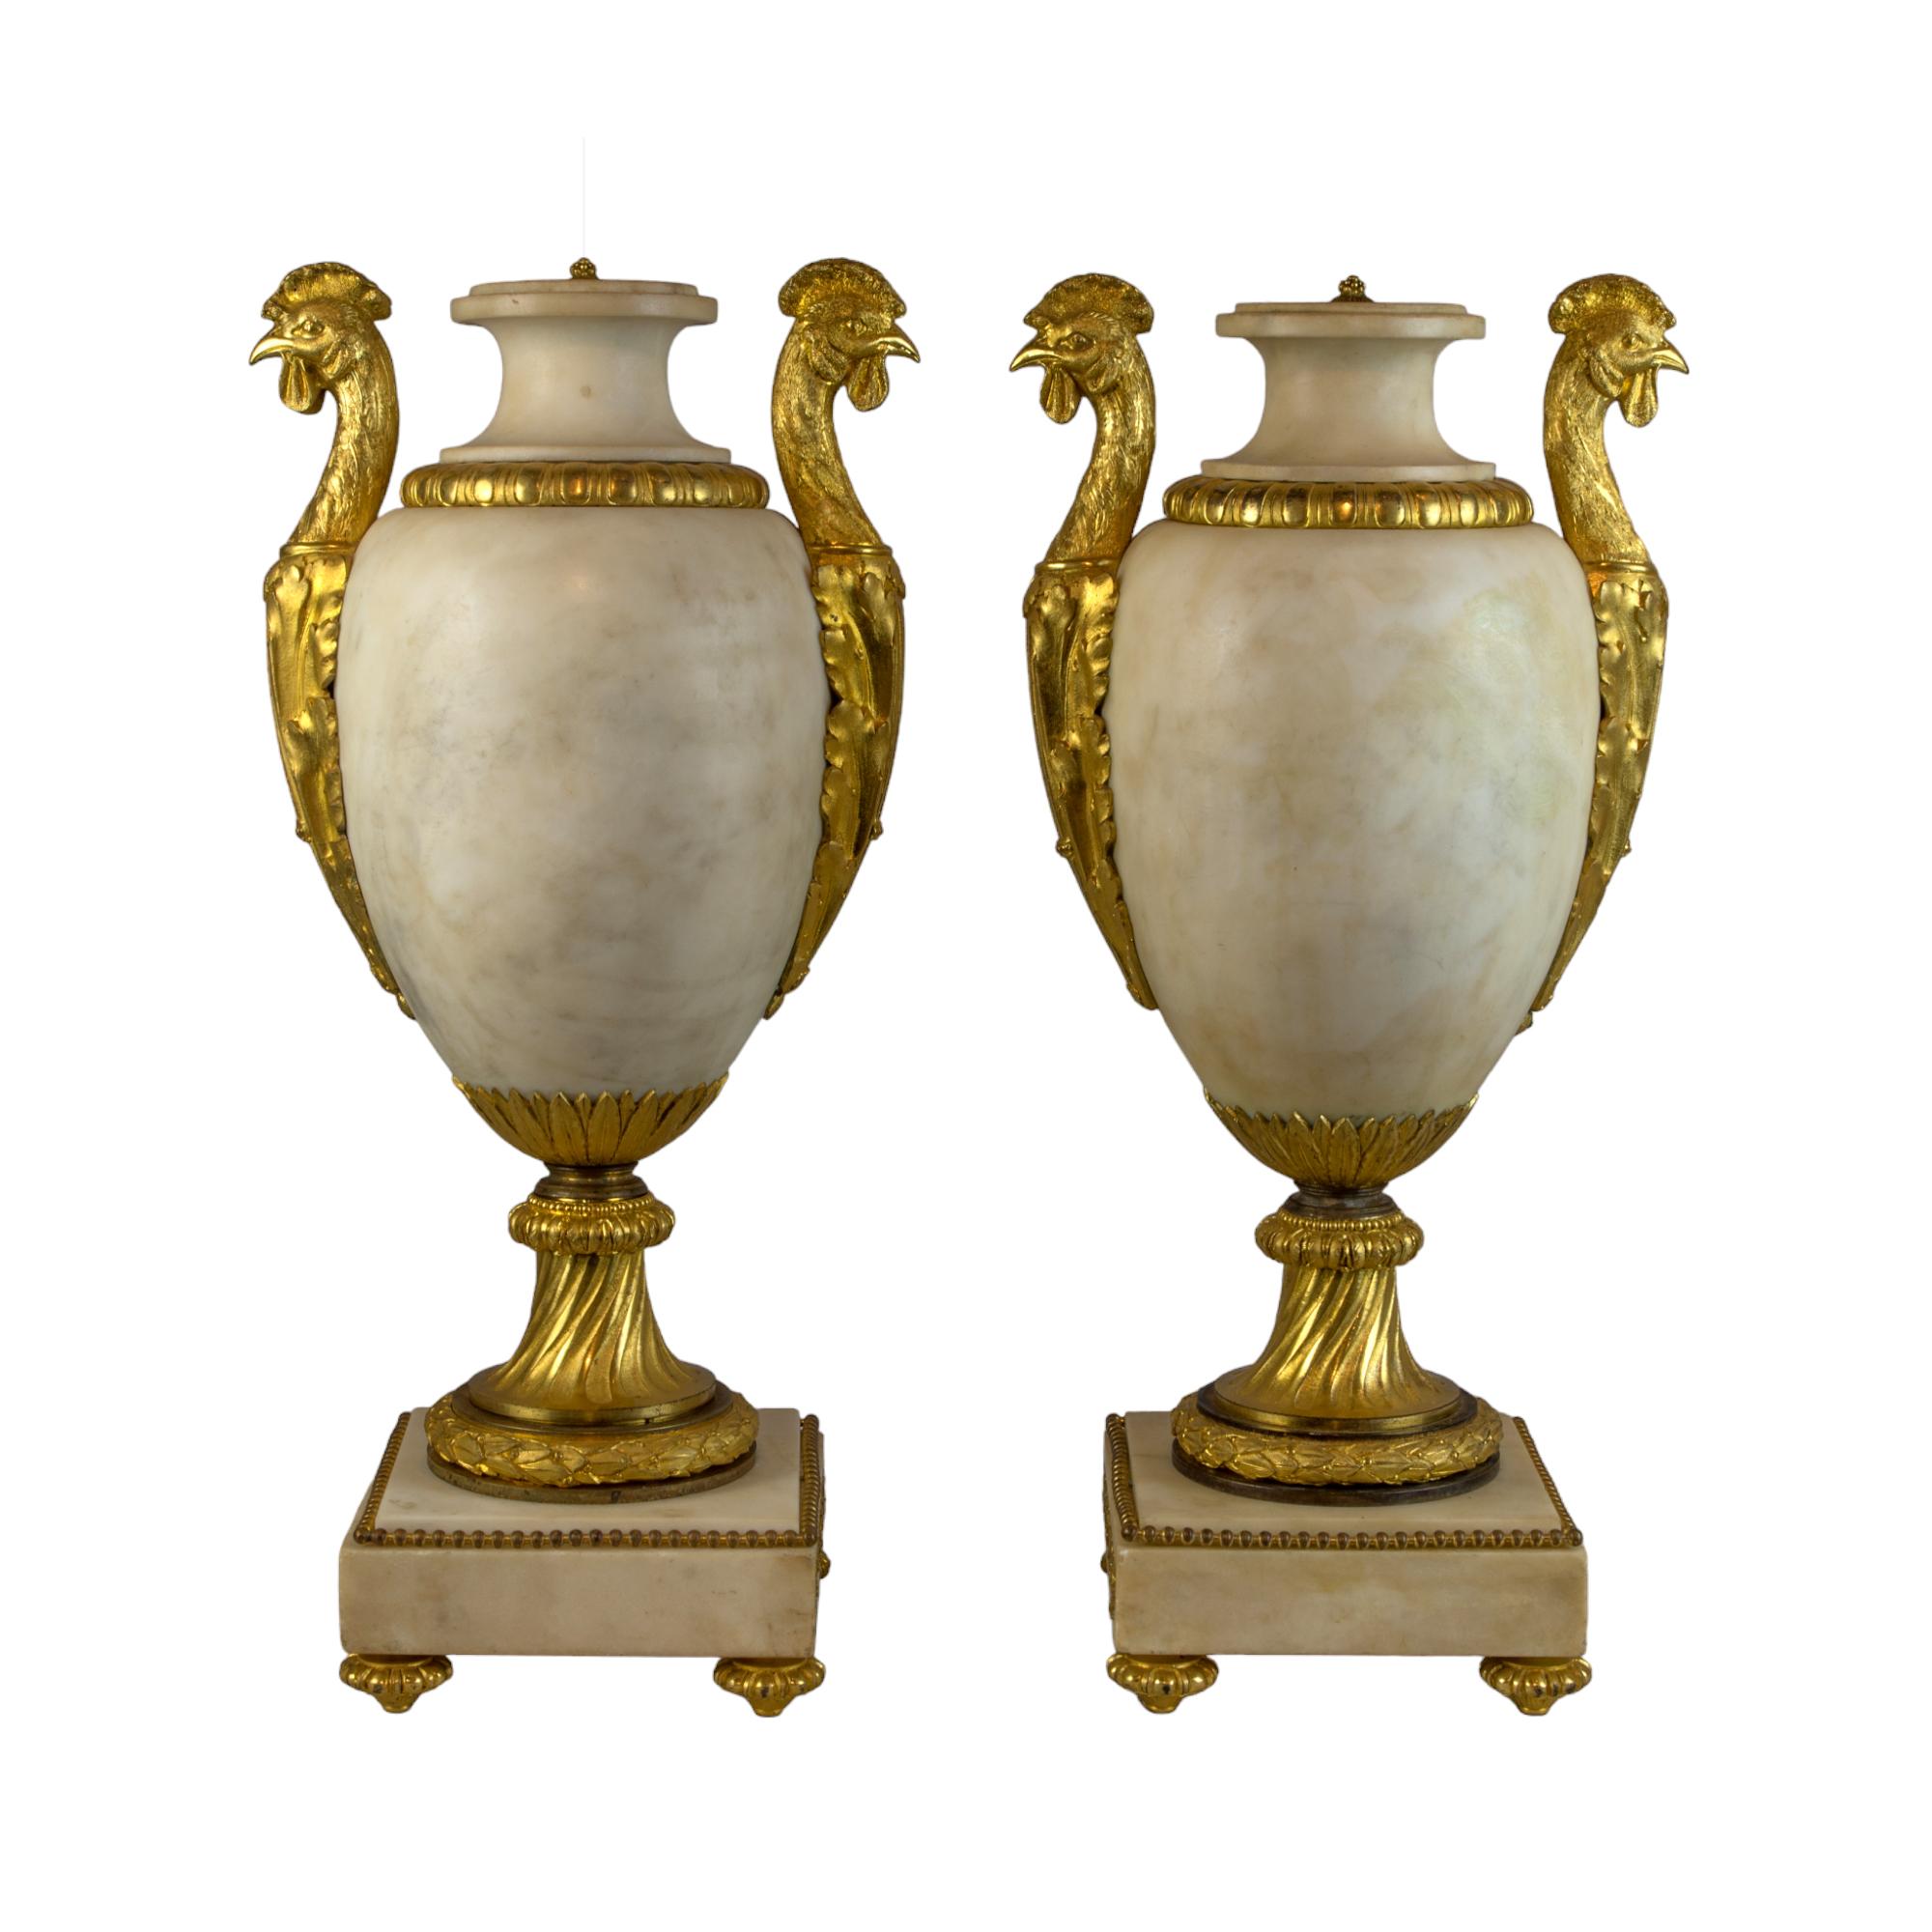 French Magnificent Pair of Louis XVI Style Gilt-Bronze-Mounted White Marble Urns For Sale